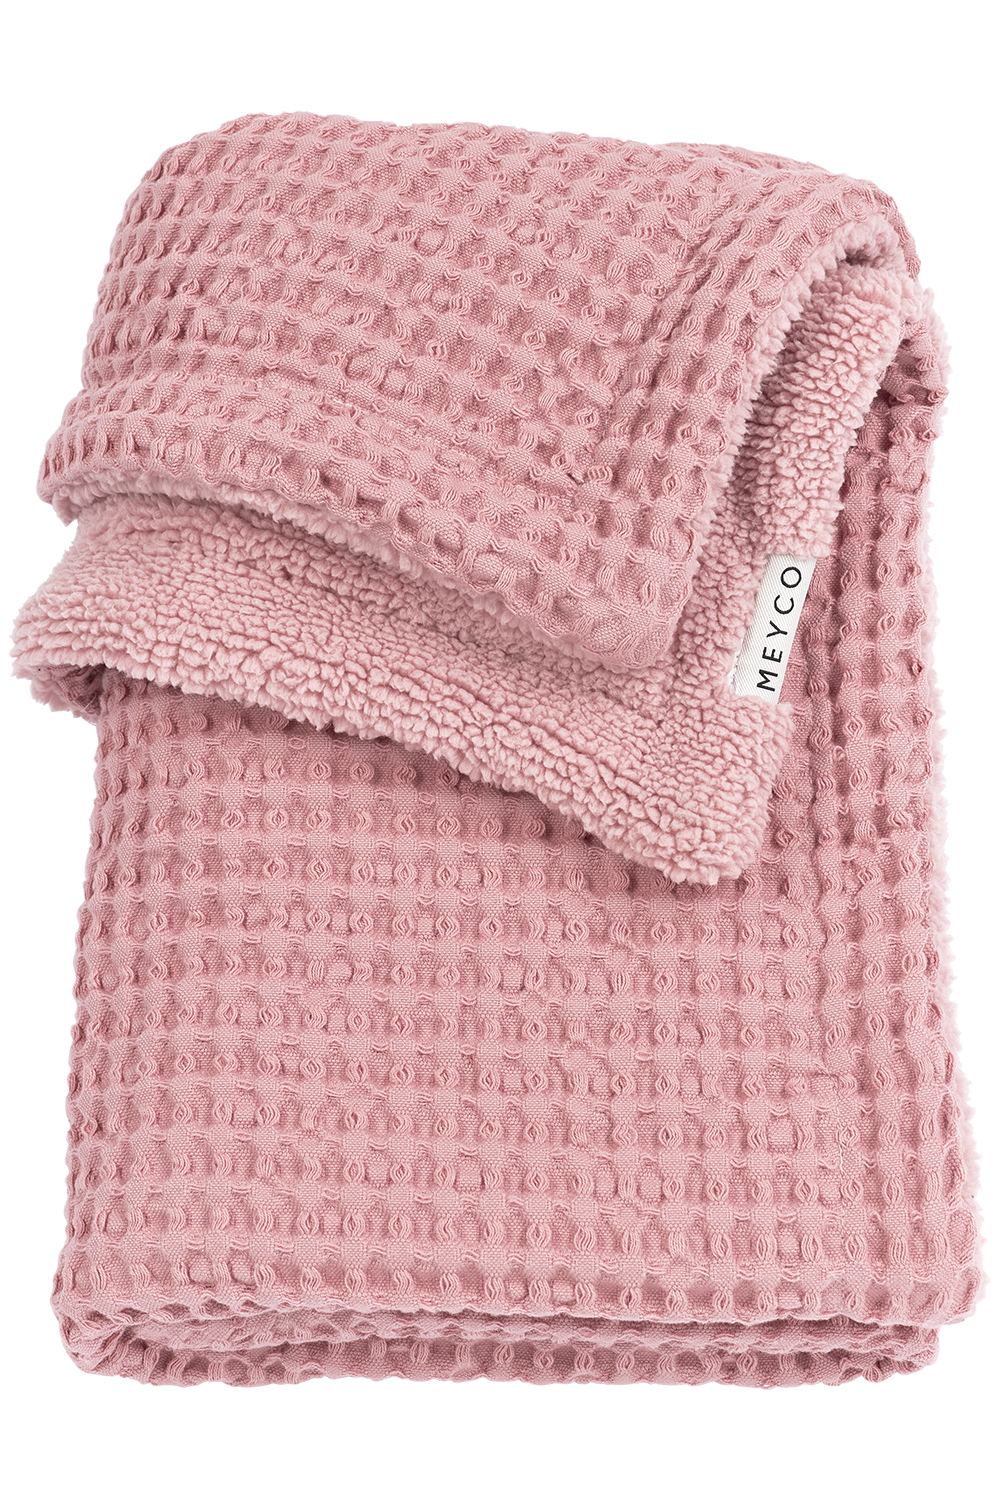 Cot bed blanket Waffle Teddy - old pink - 100x150cm